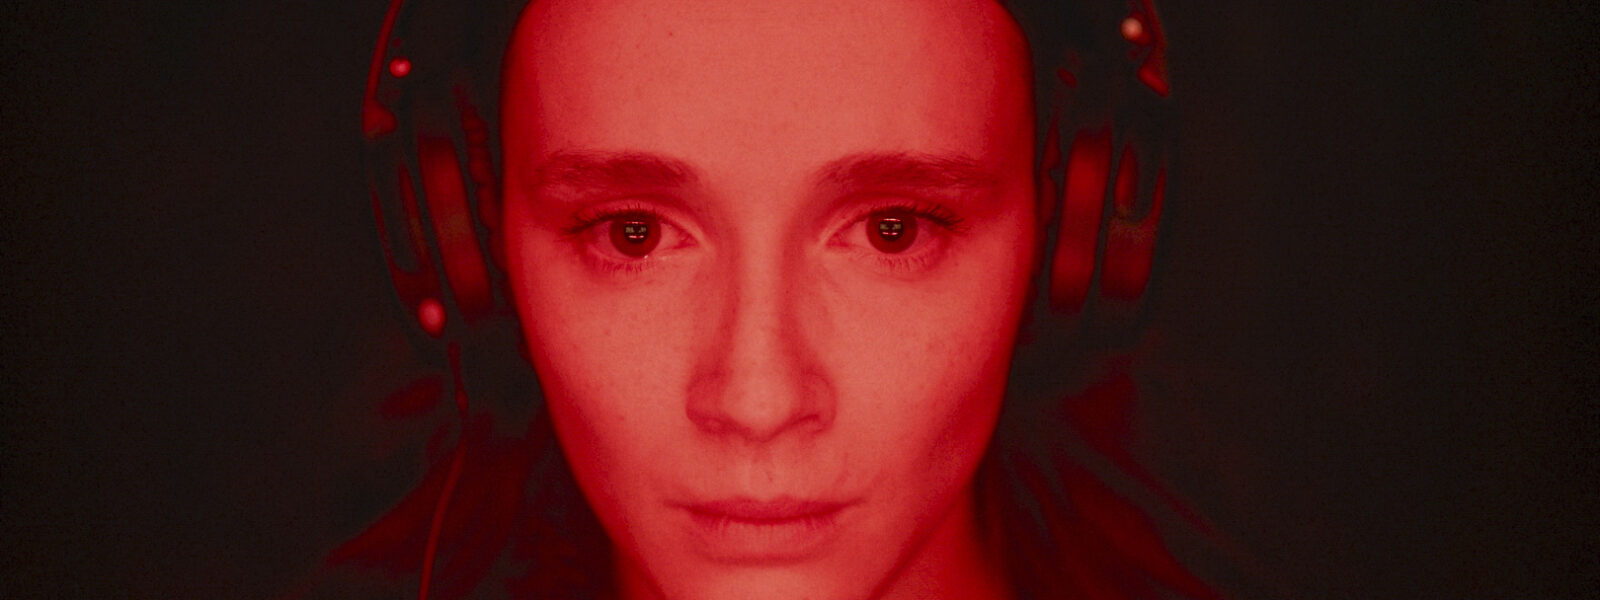 Woman with headphones in red light